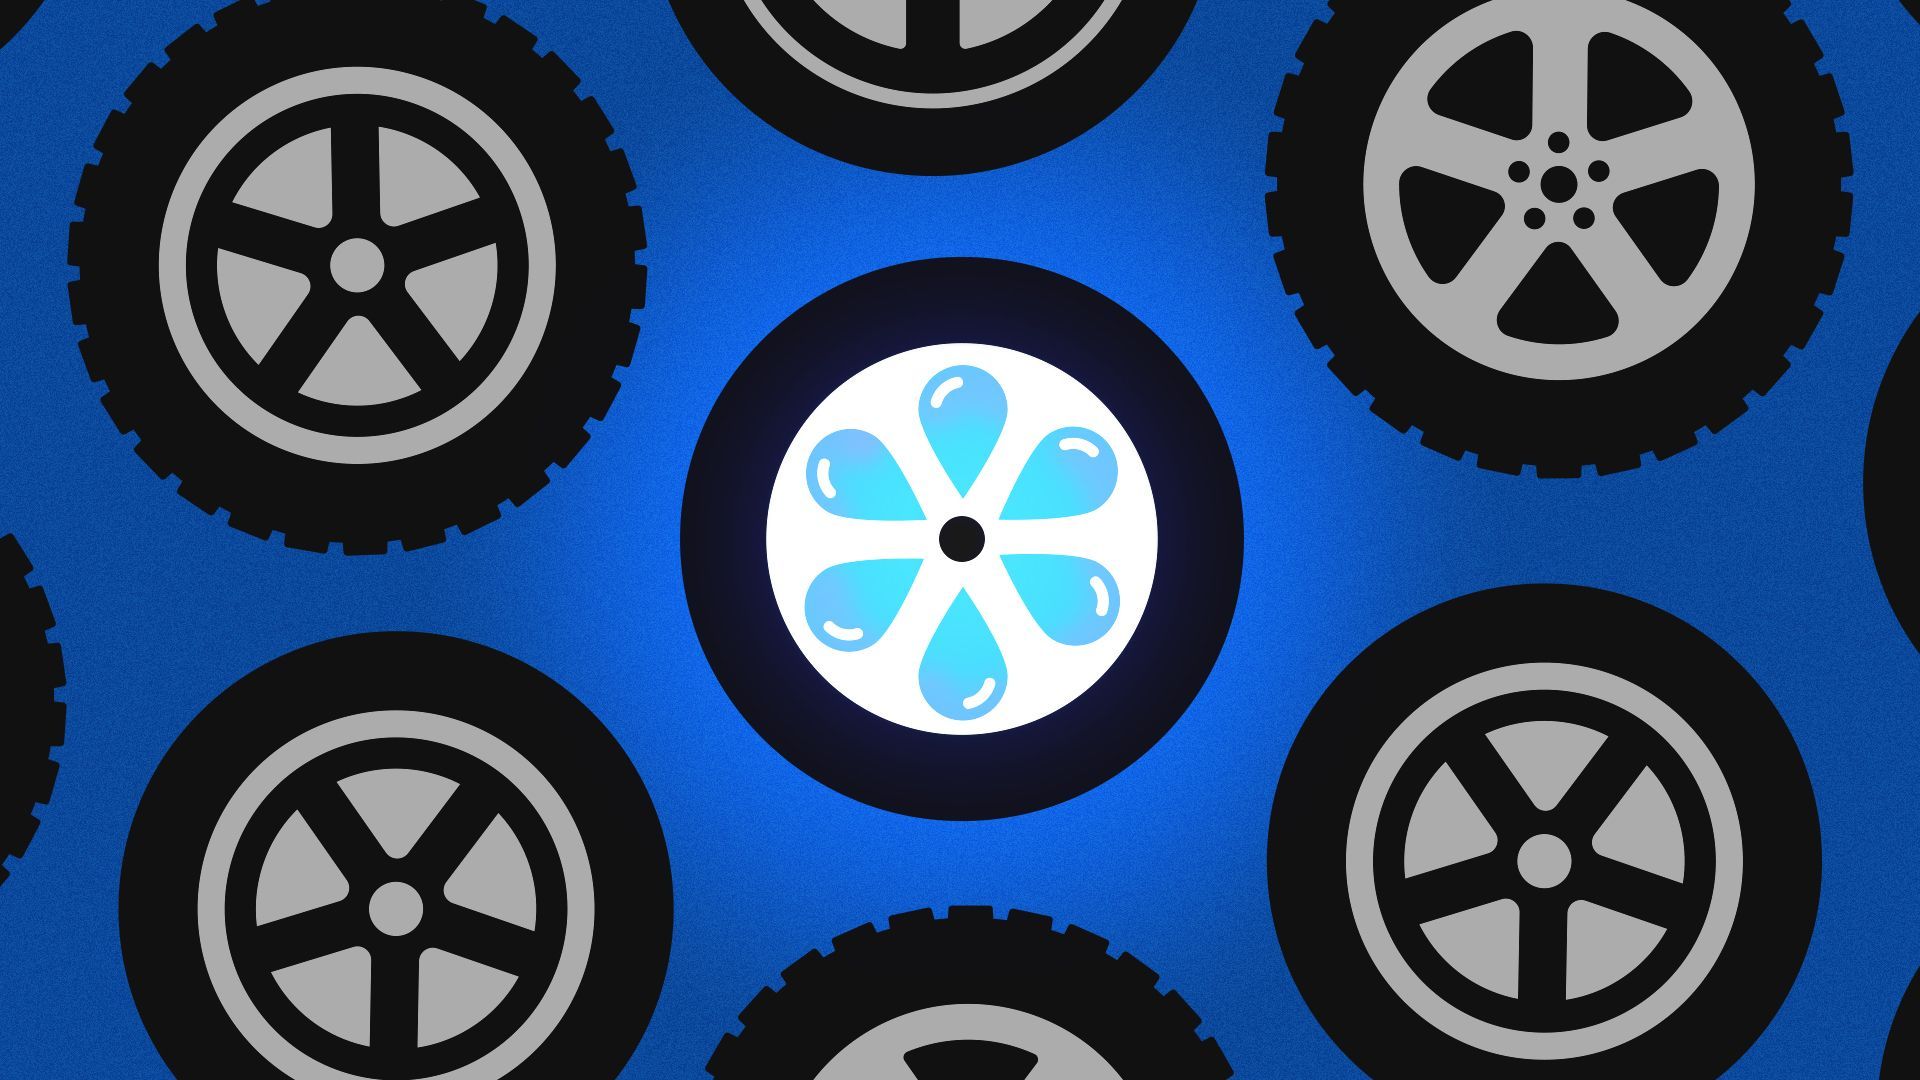 Illustration of a pattern of tires with hubcaps with one hubcap made of water droplets.